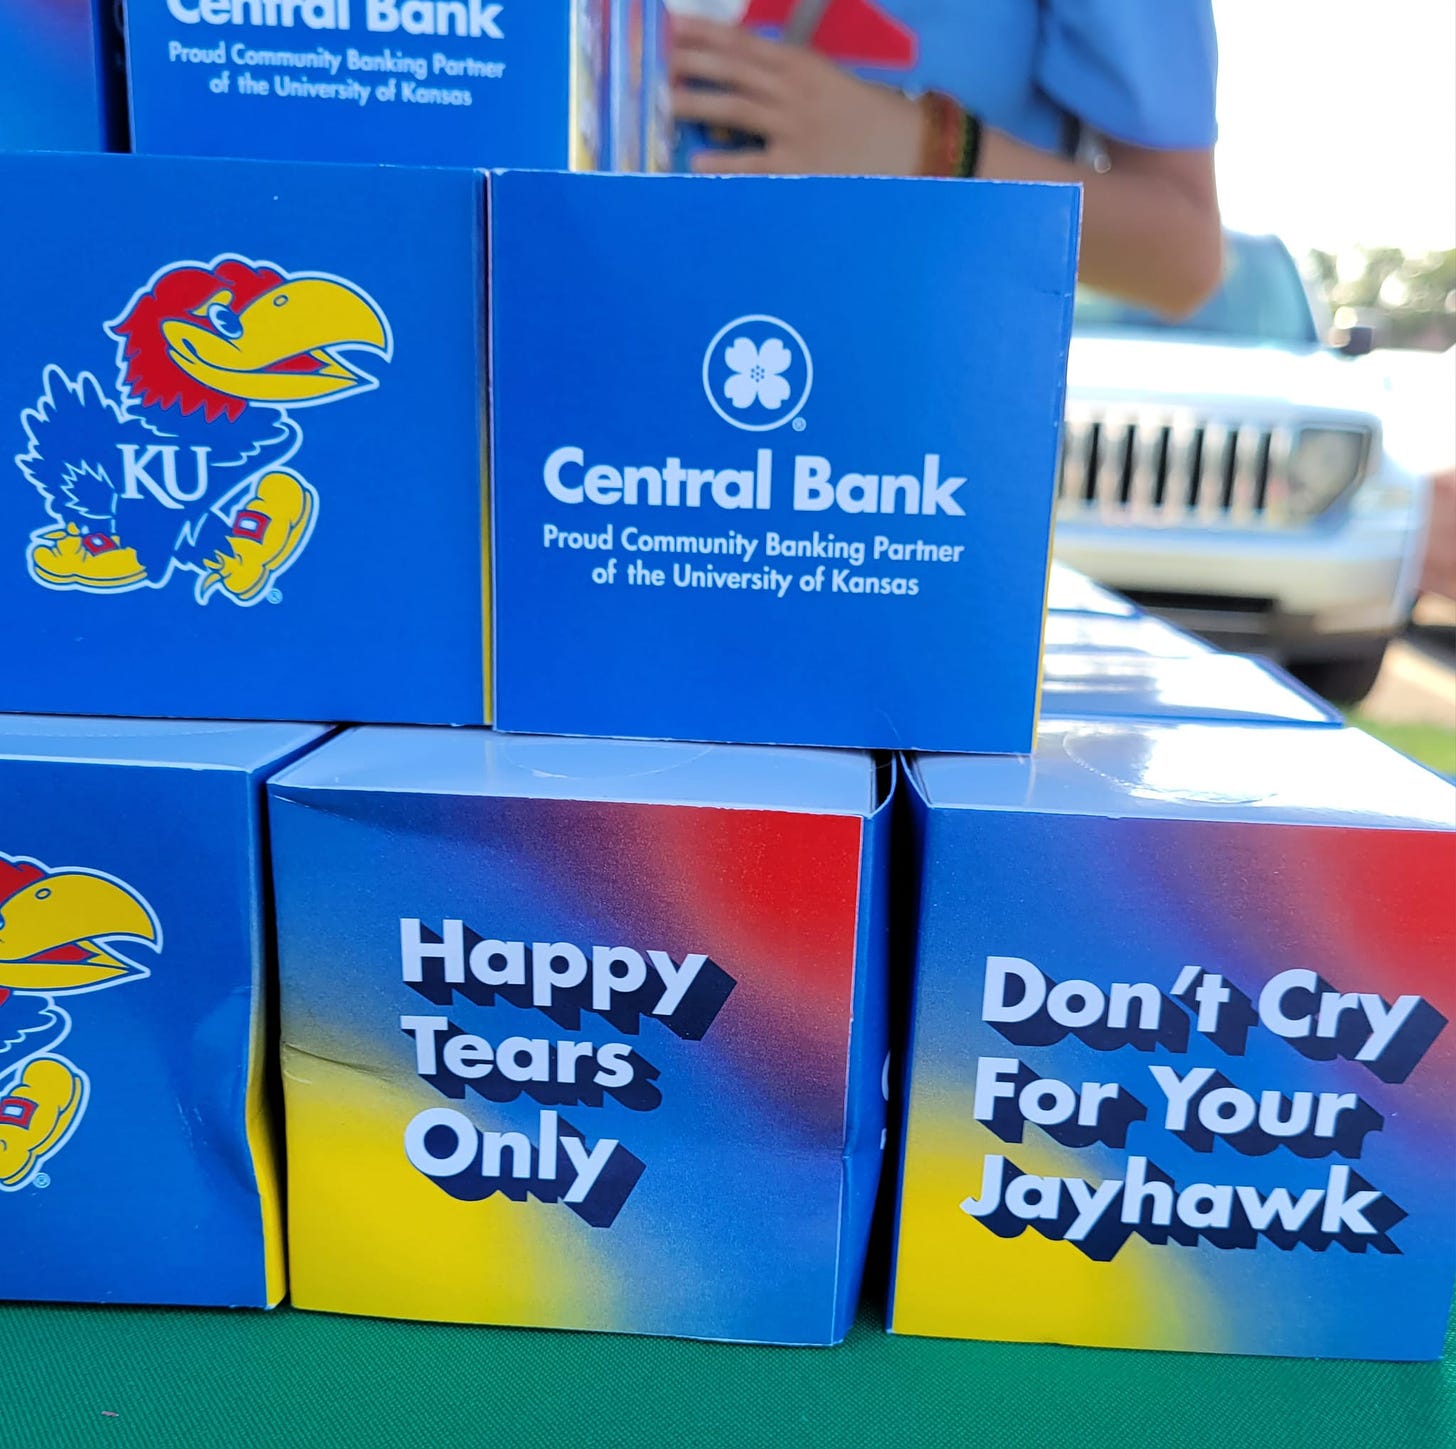 May be an image of text that says 'al bank Proud Community Banking Portner he University ofKonsas KU Central Bank Proud Community Banking Partner of the University of Kansas Happy Tears Only Don't Cry For Your Jayhawk'